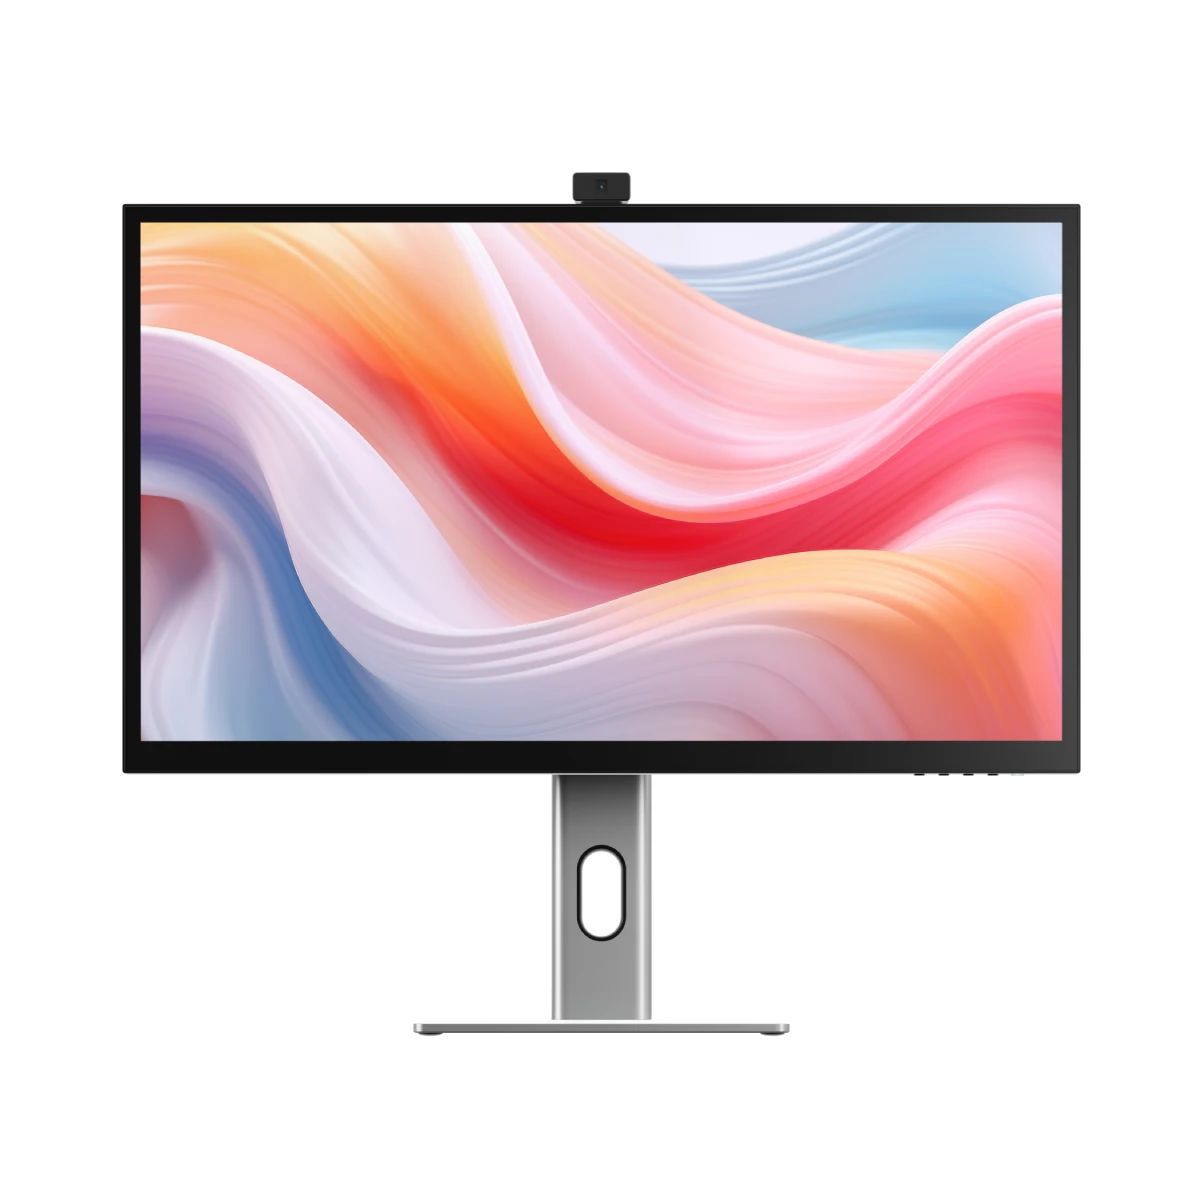 clarity-pro-27-uhd-4k-monitor-with-65w-pd-and-webcam-pack-of-2-thunderbolt-4-blaze-docking-station2